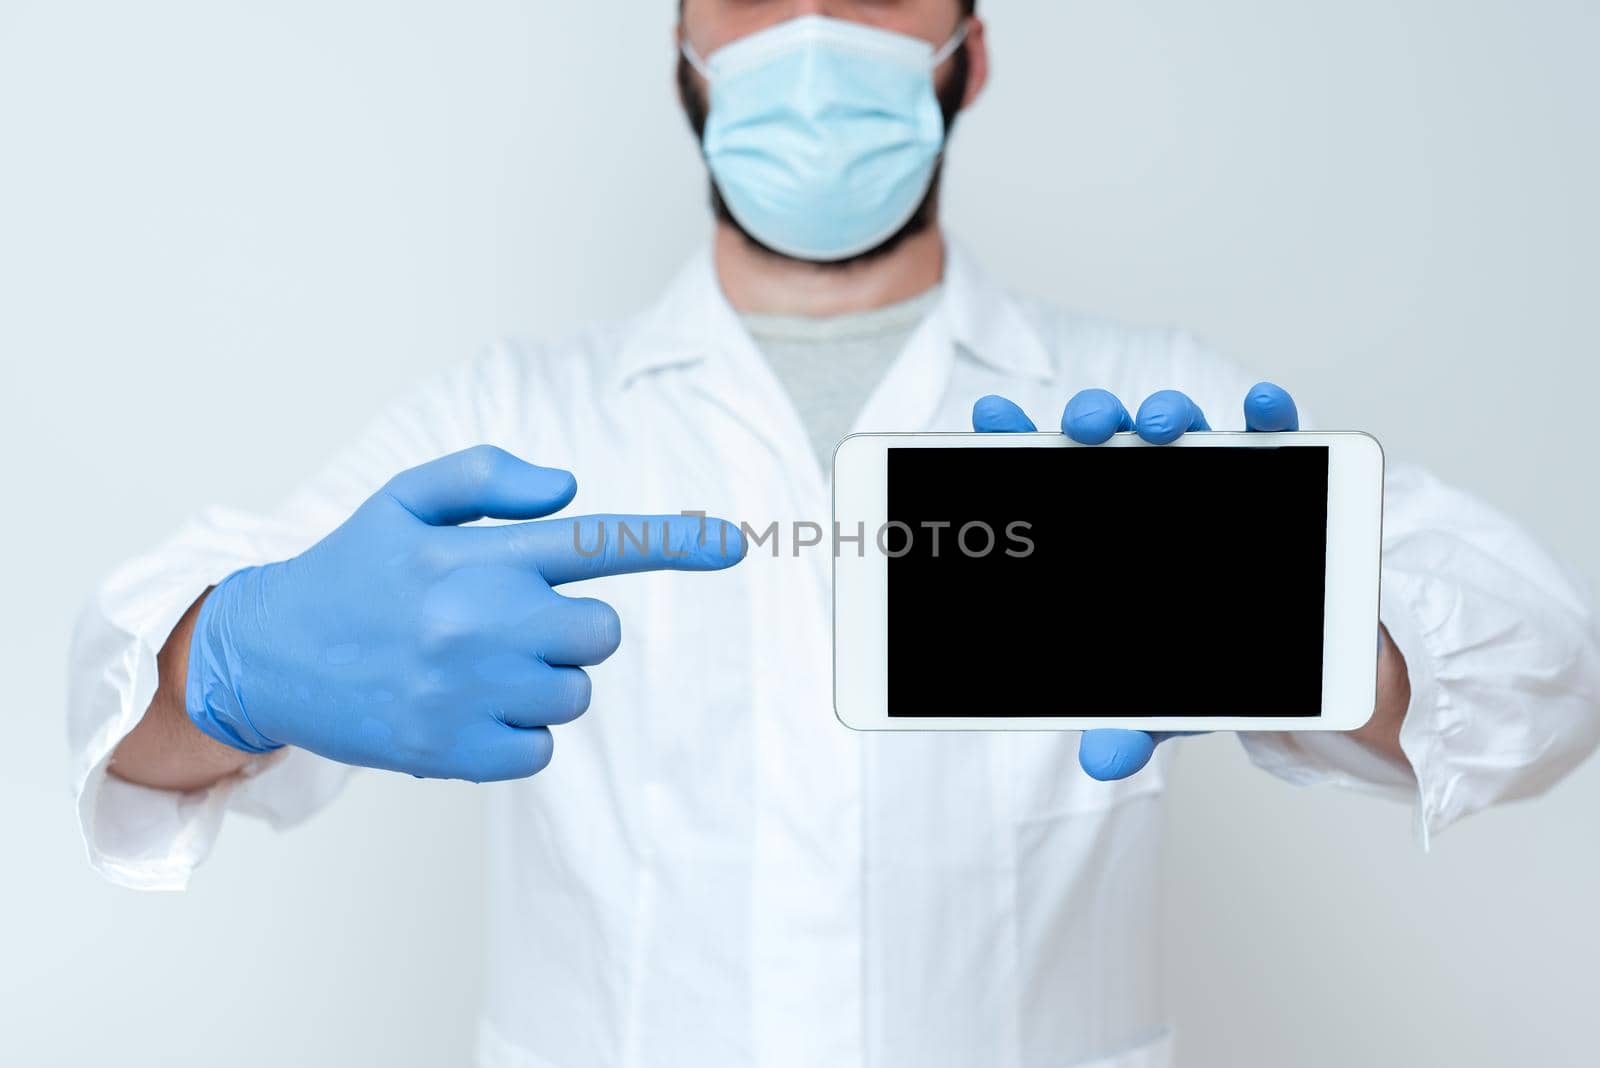 Research Scientist Presenting New Smartphone, Upgrading Old Technology